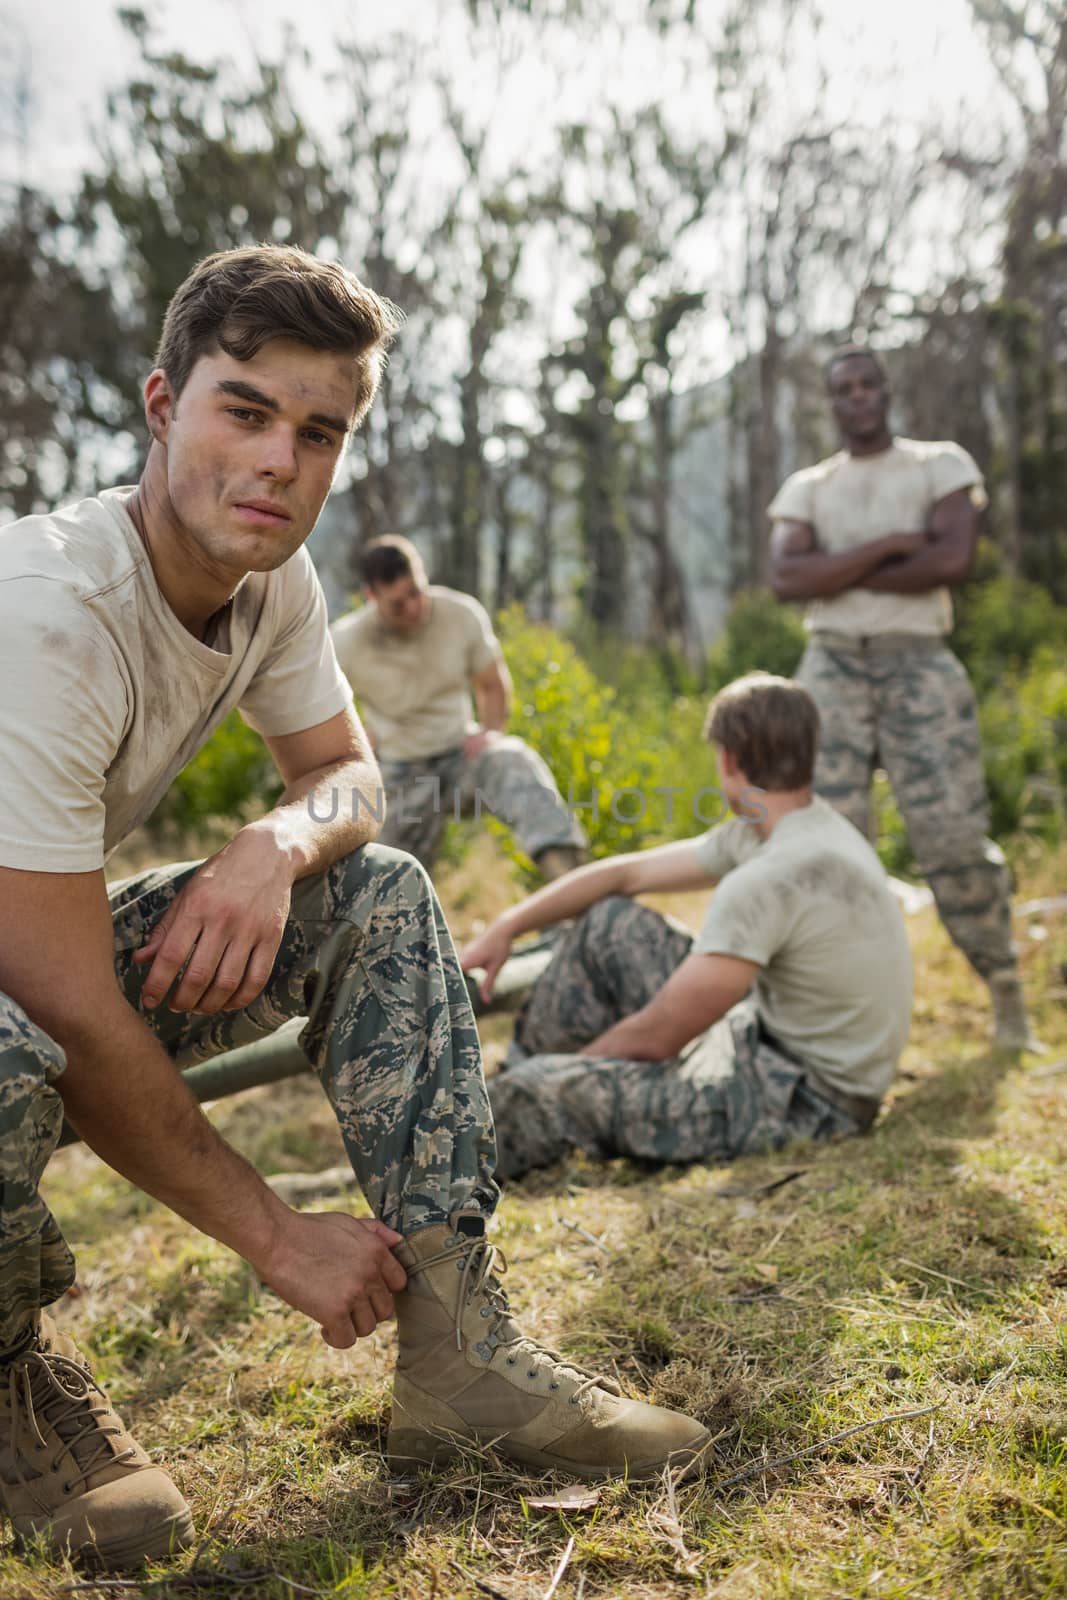 Soldier tying his shoe laces in boot camp by Wavebreakmedia